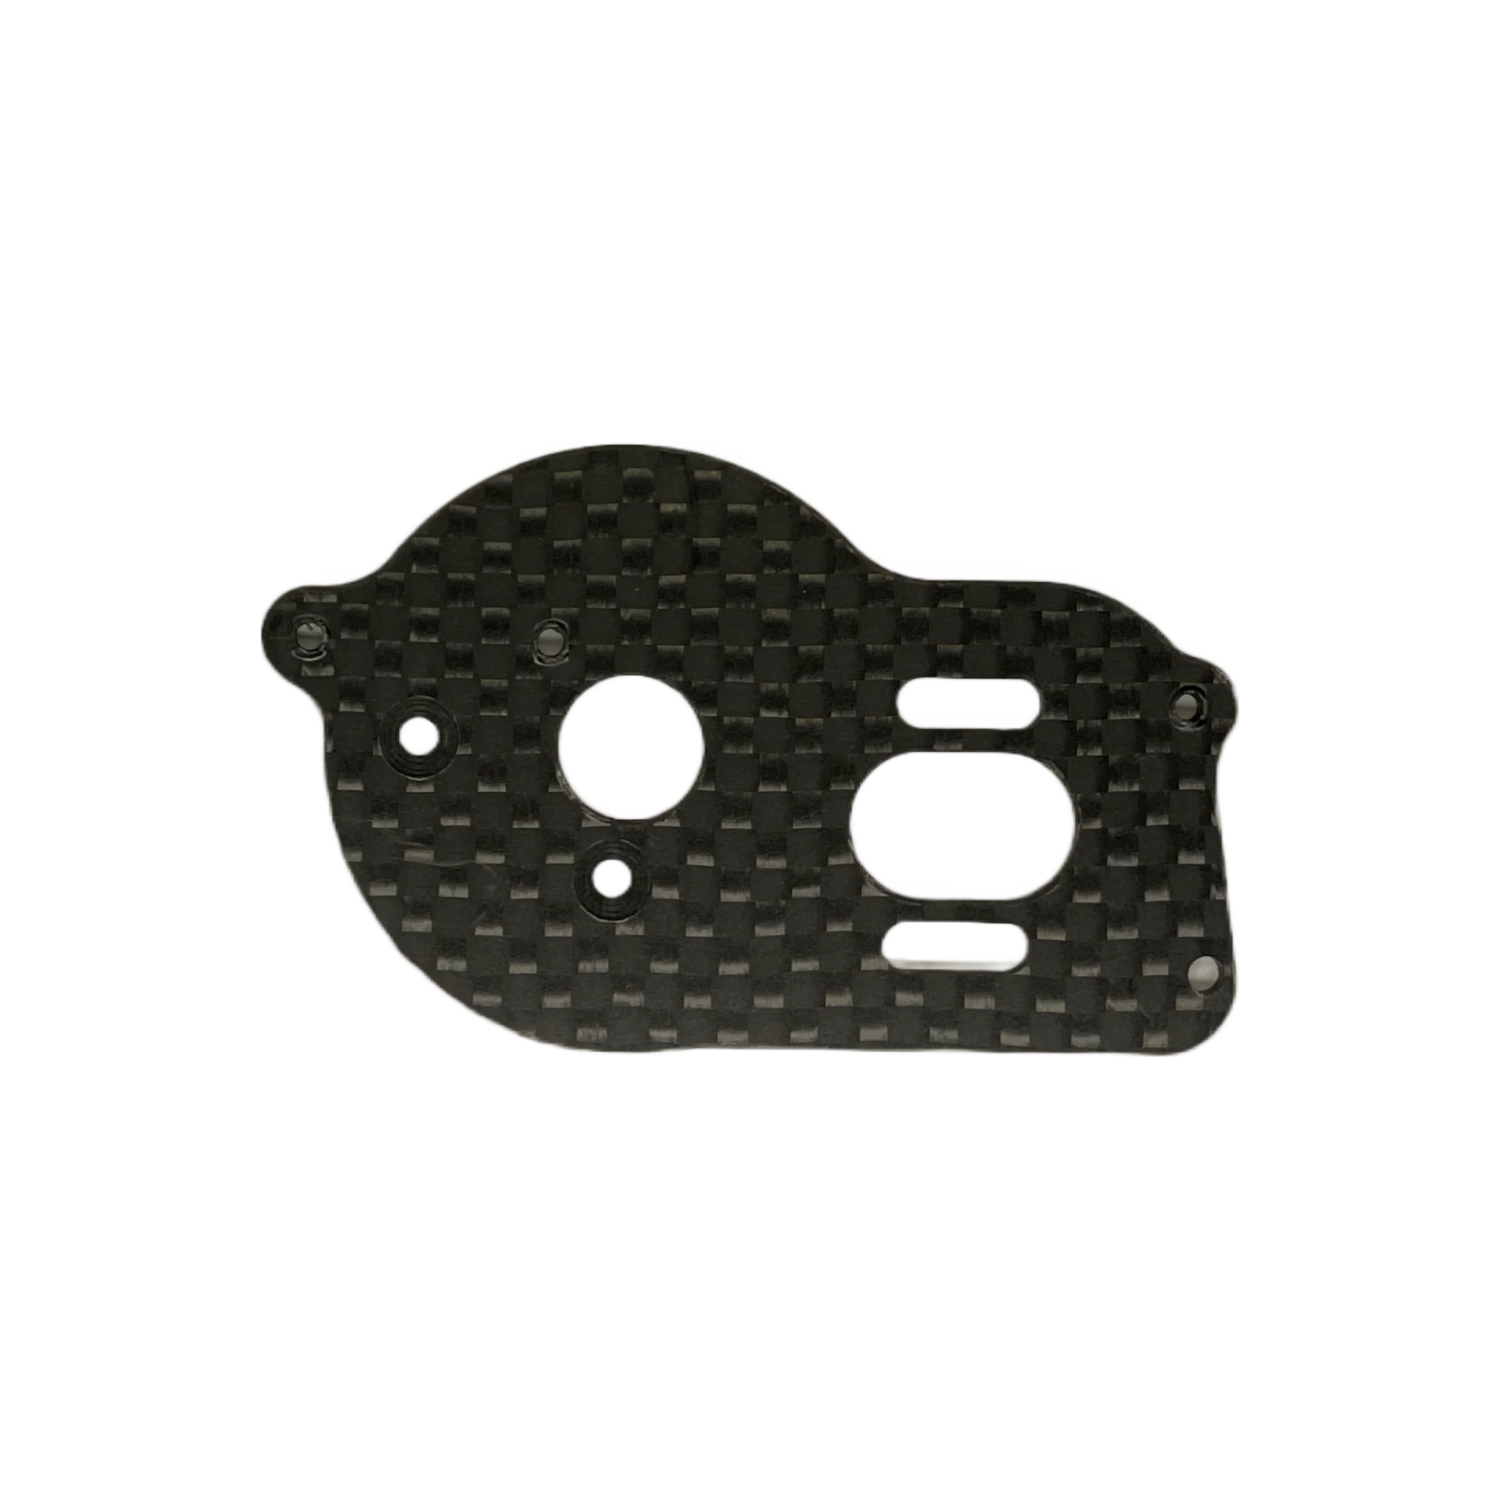 175RC Mini B/T Slotted Carbon Motor Plate